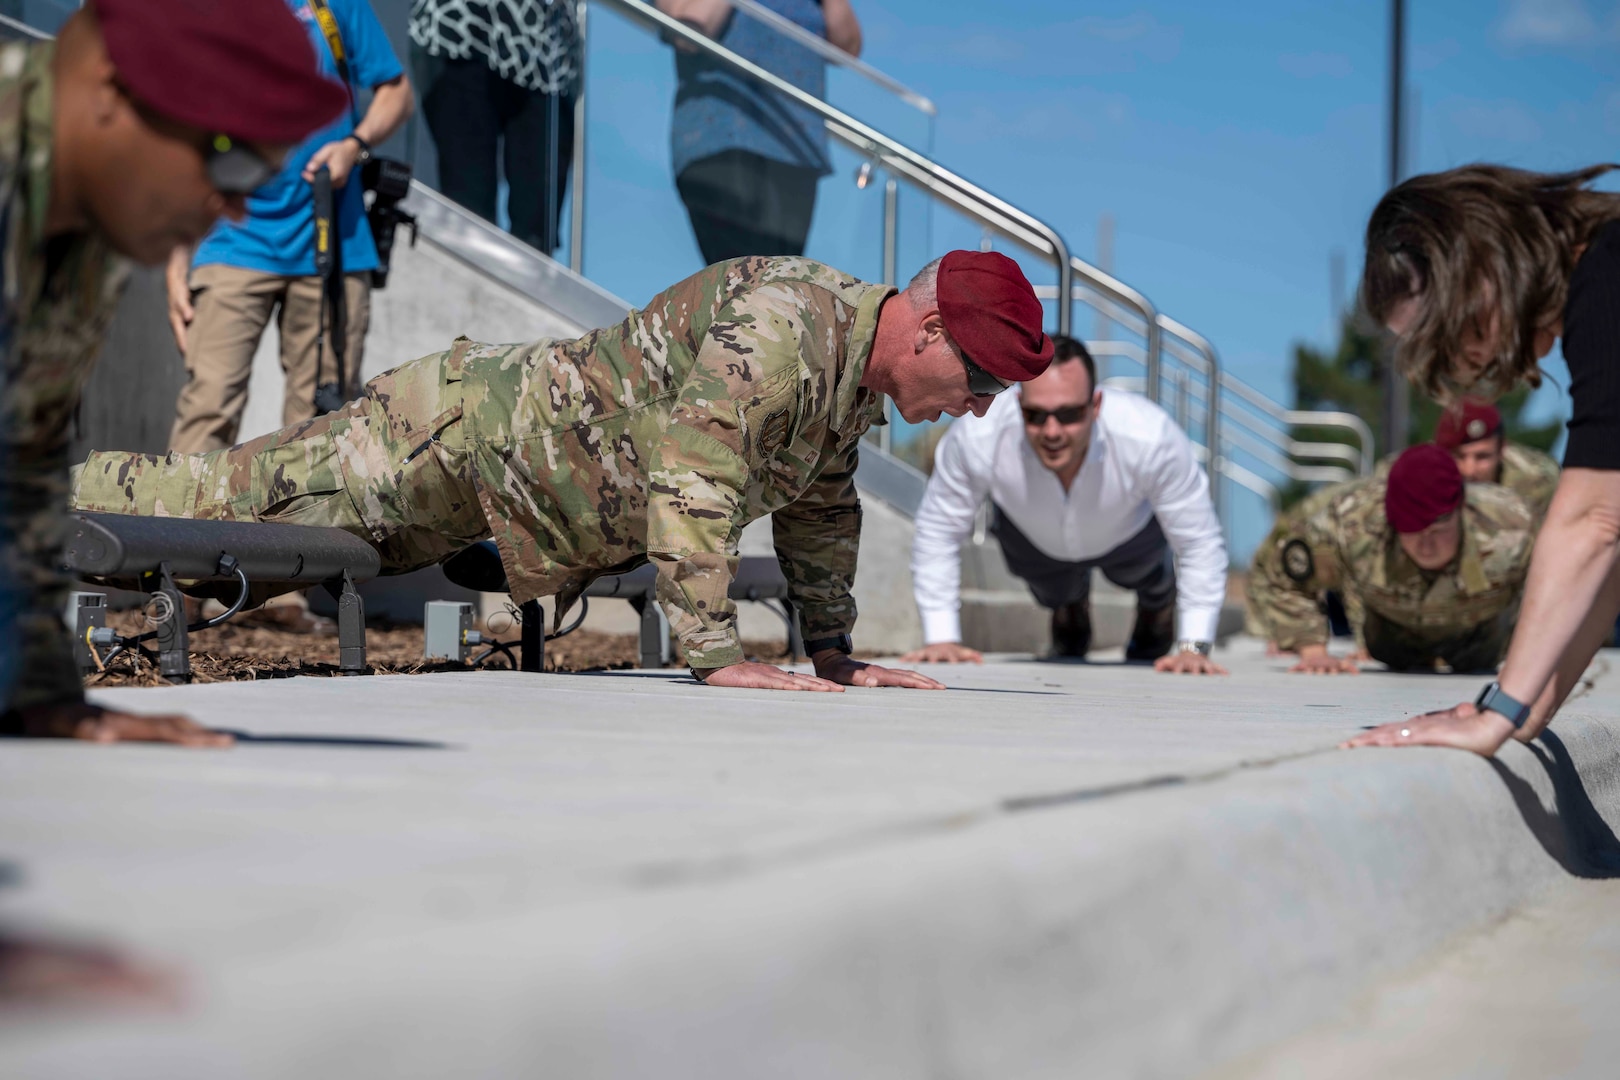 A man conducting push-ups while calling out commands for the crowd to follow.